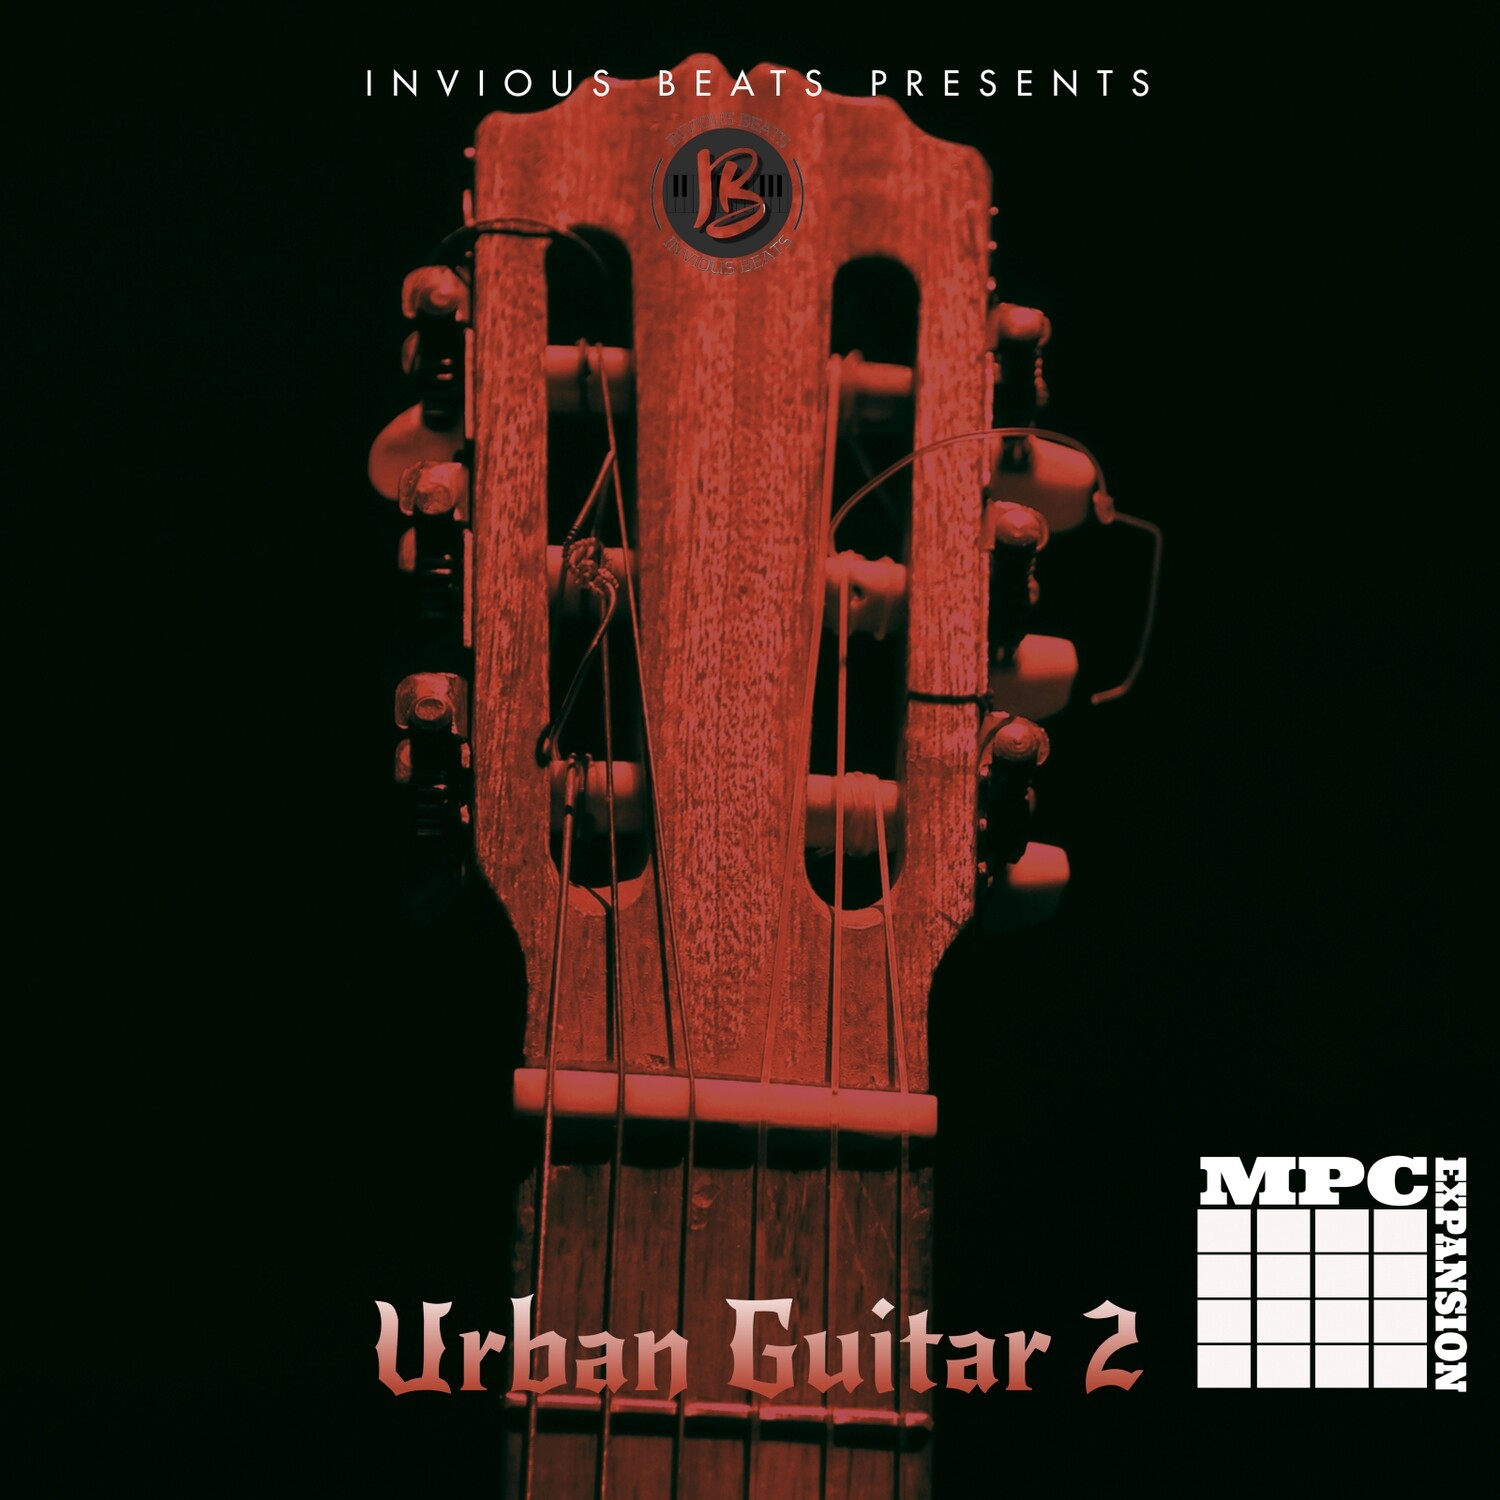 2 MPC EXPANSIONS "URBAN GUITAR 1 & 2 BUNDLE" by INVIOUS